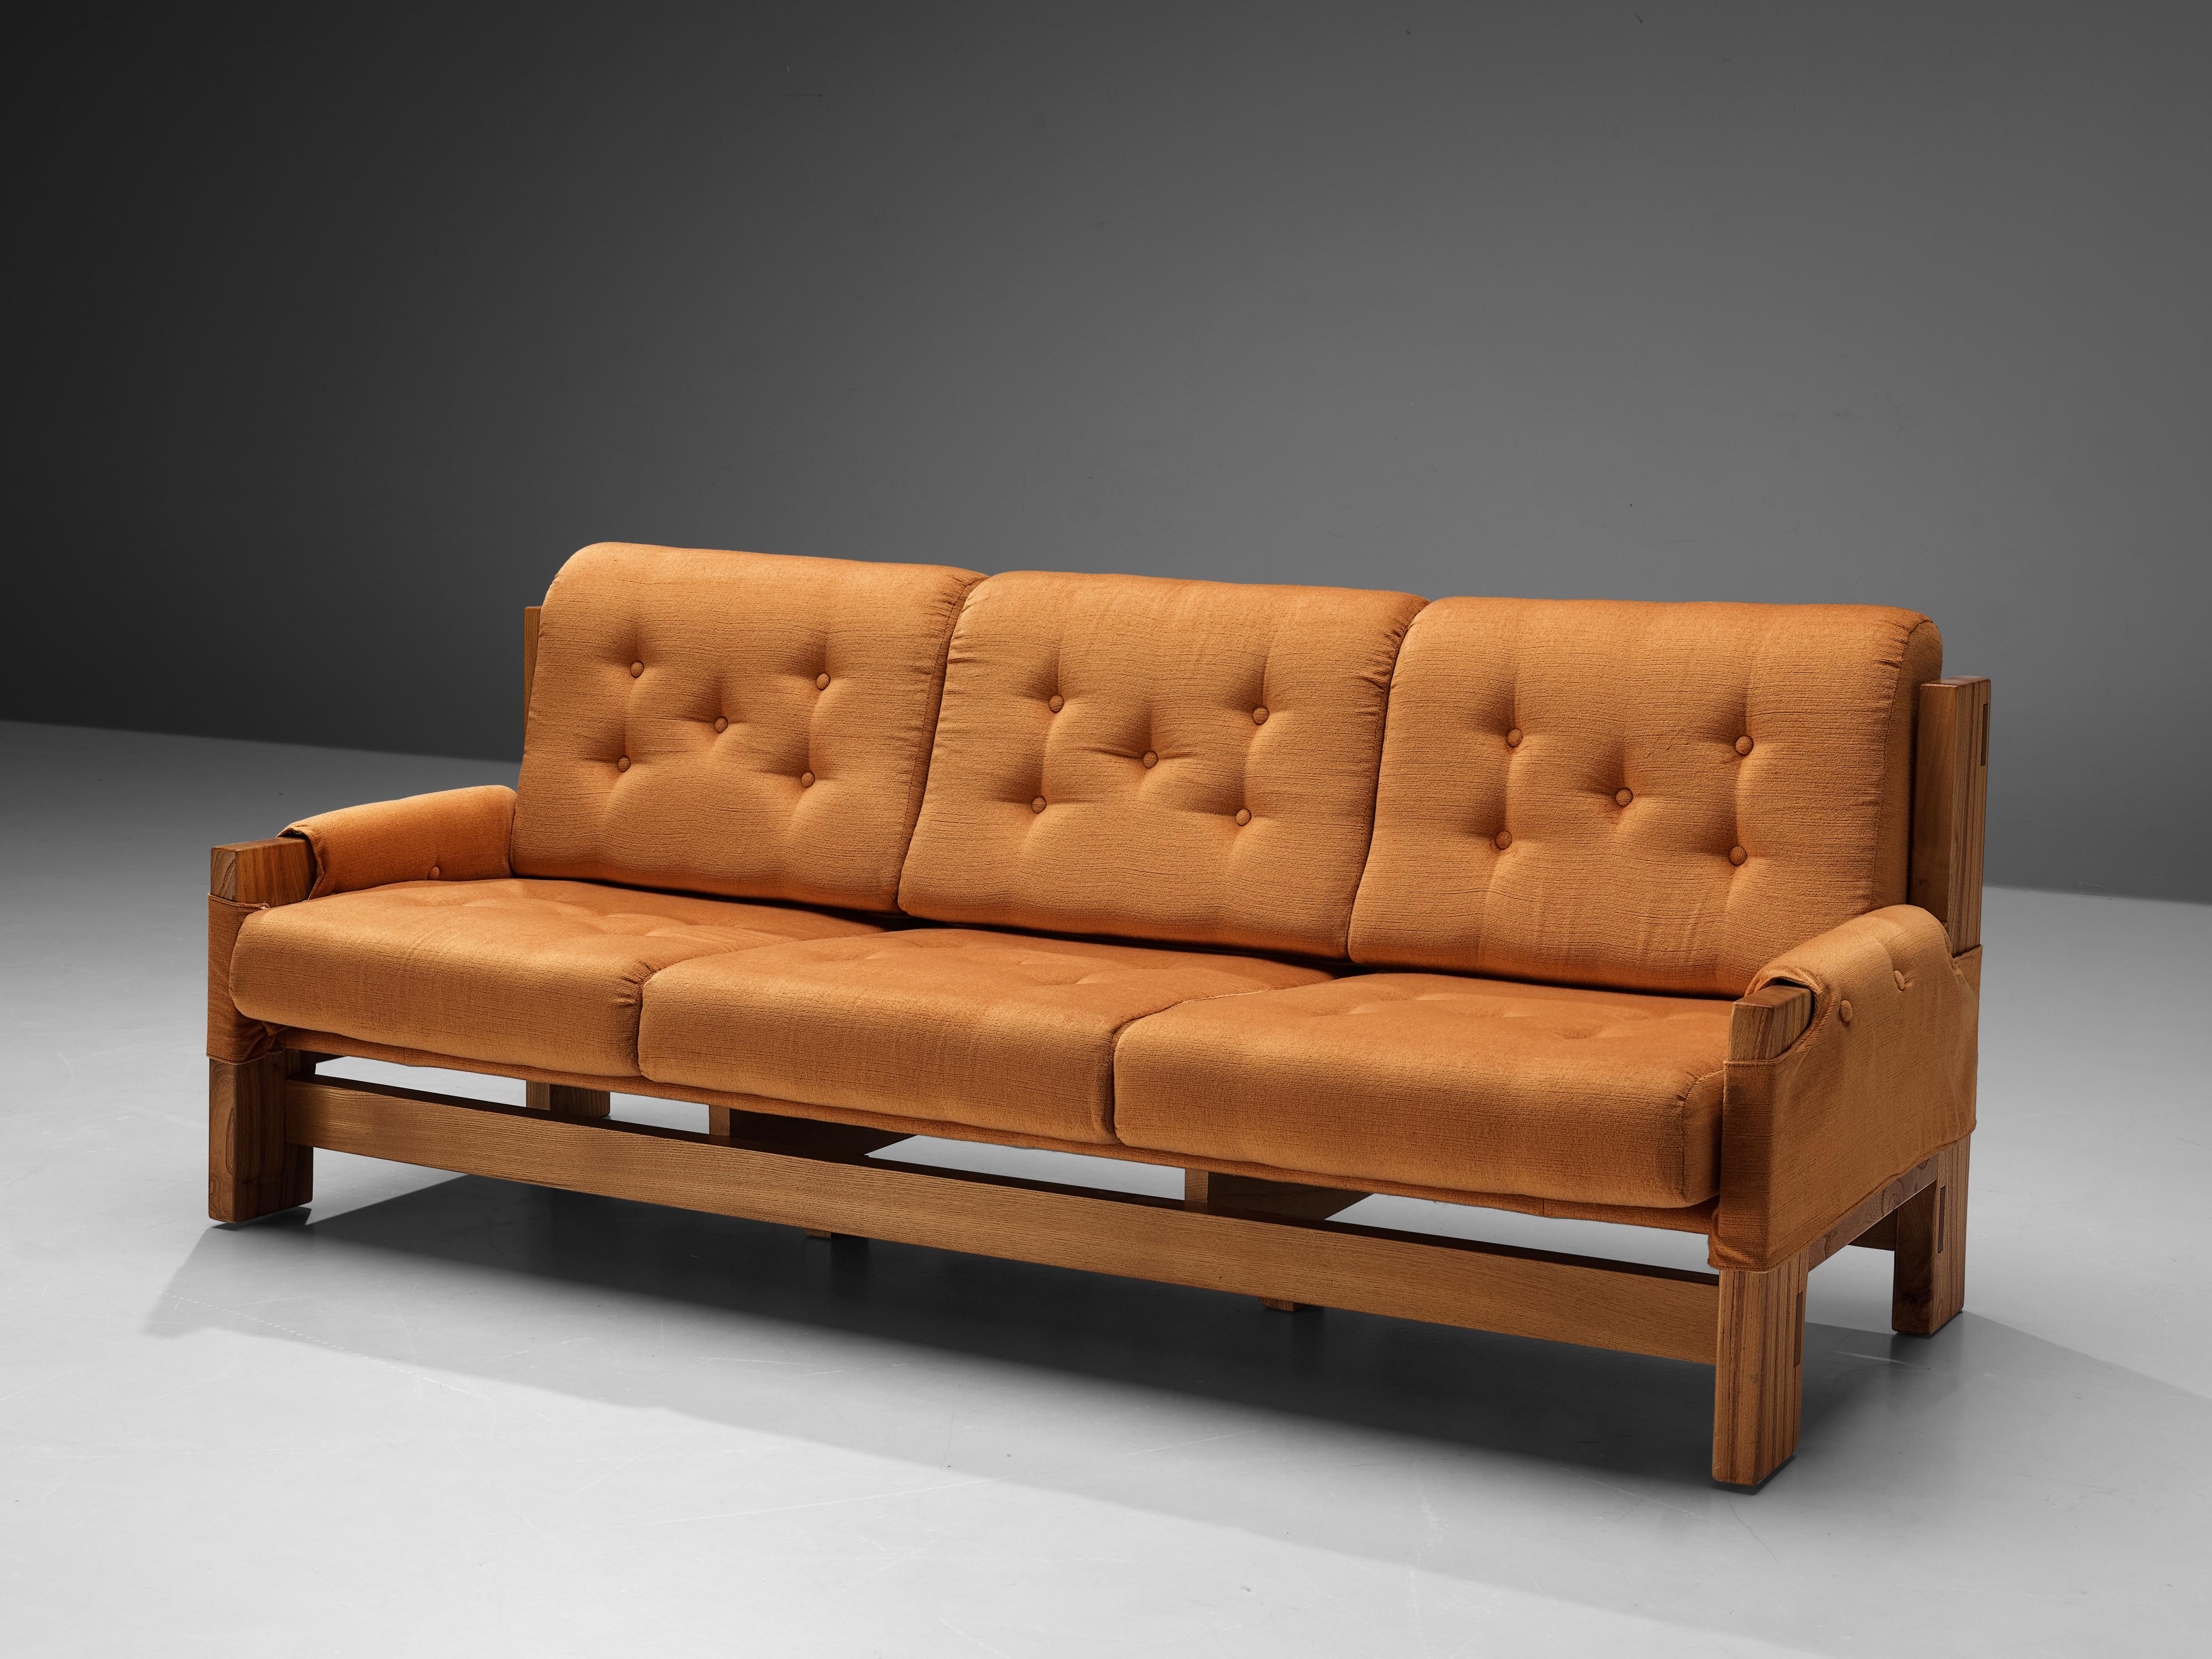 Maison Regain, sofa, elm, fabric, leather France, 1960s

This sofa by Maison Regain is an elegant and well-proportioned piece within a simplistic construction that allows it to fit seamlessly into any interior. The designer decided to stay modest